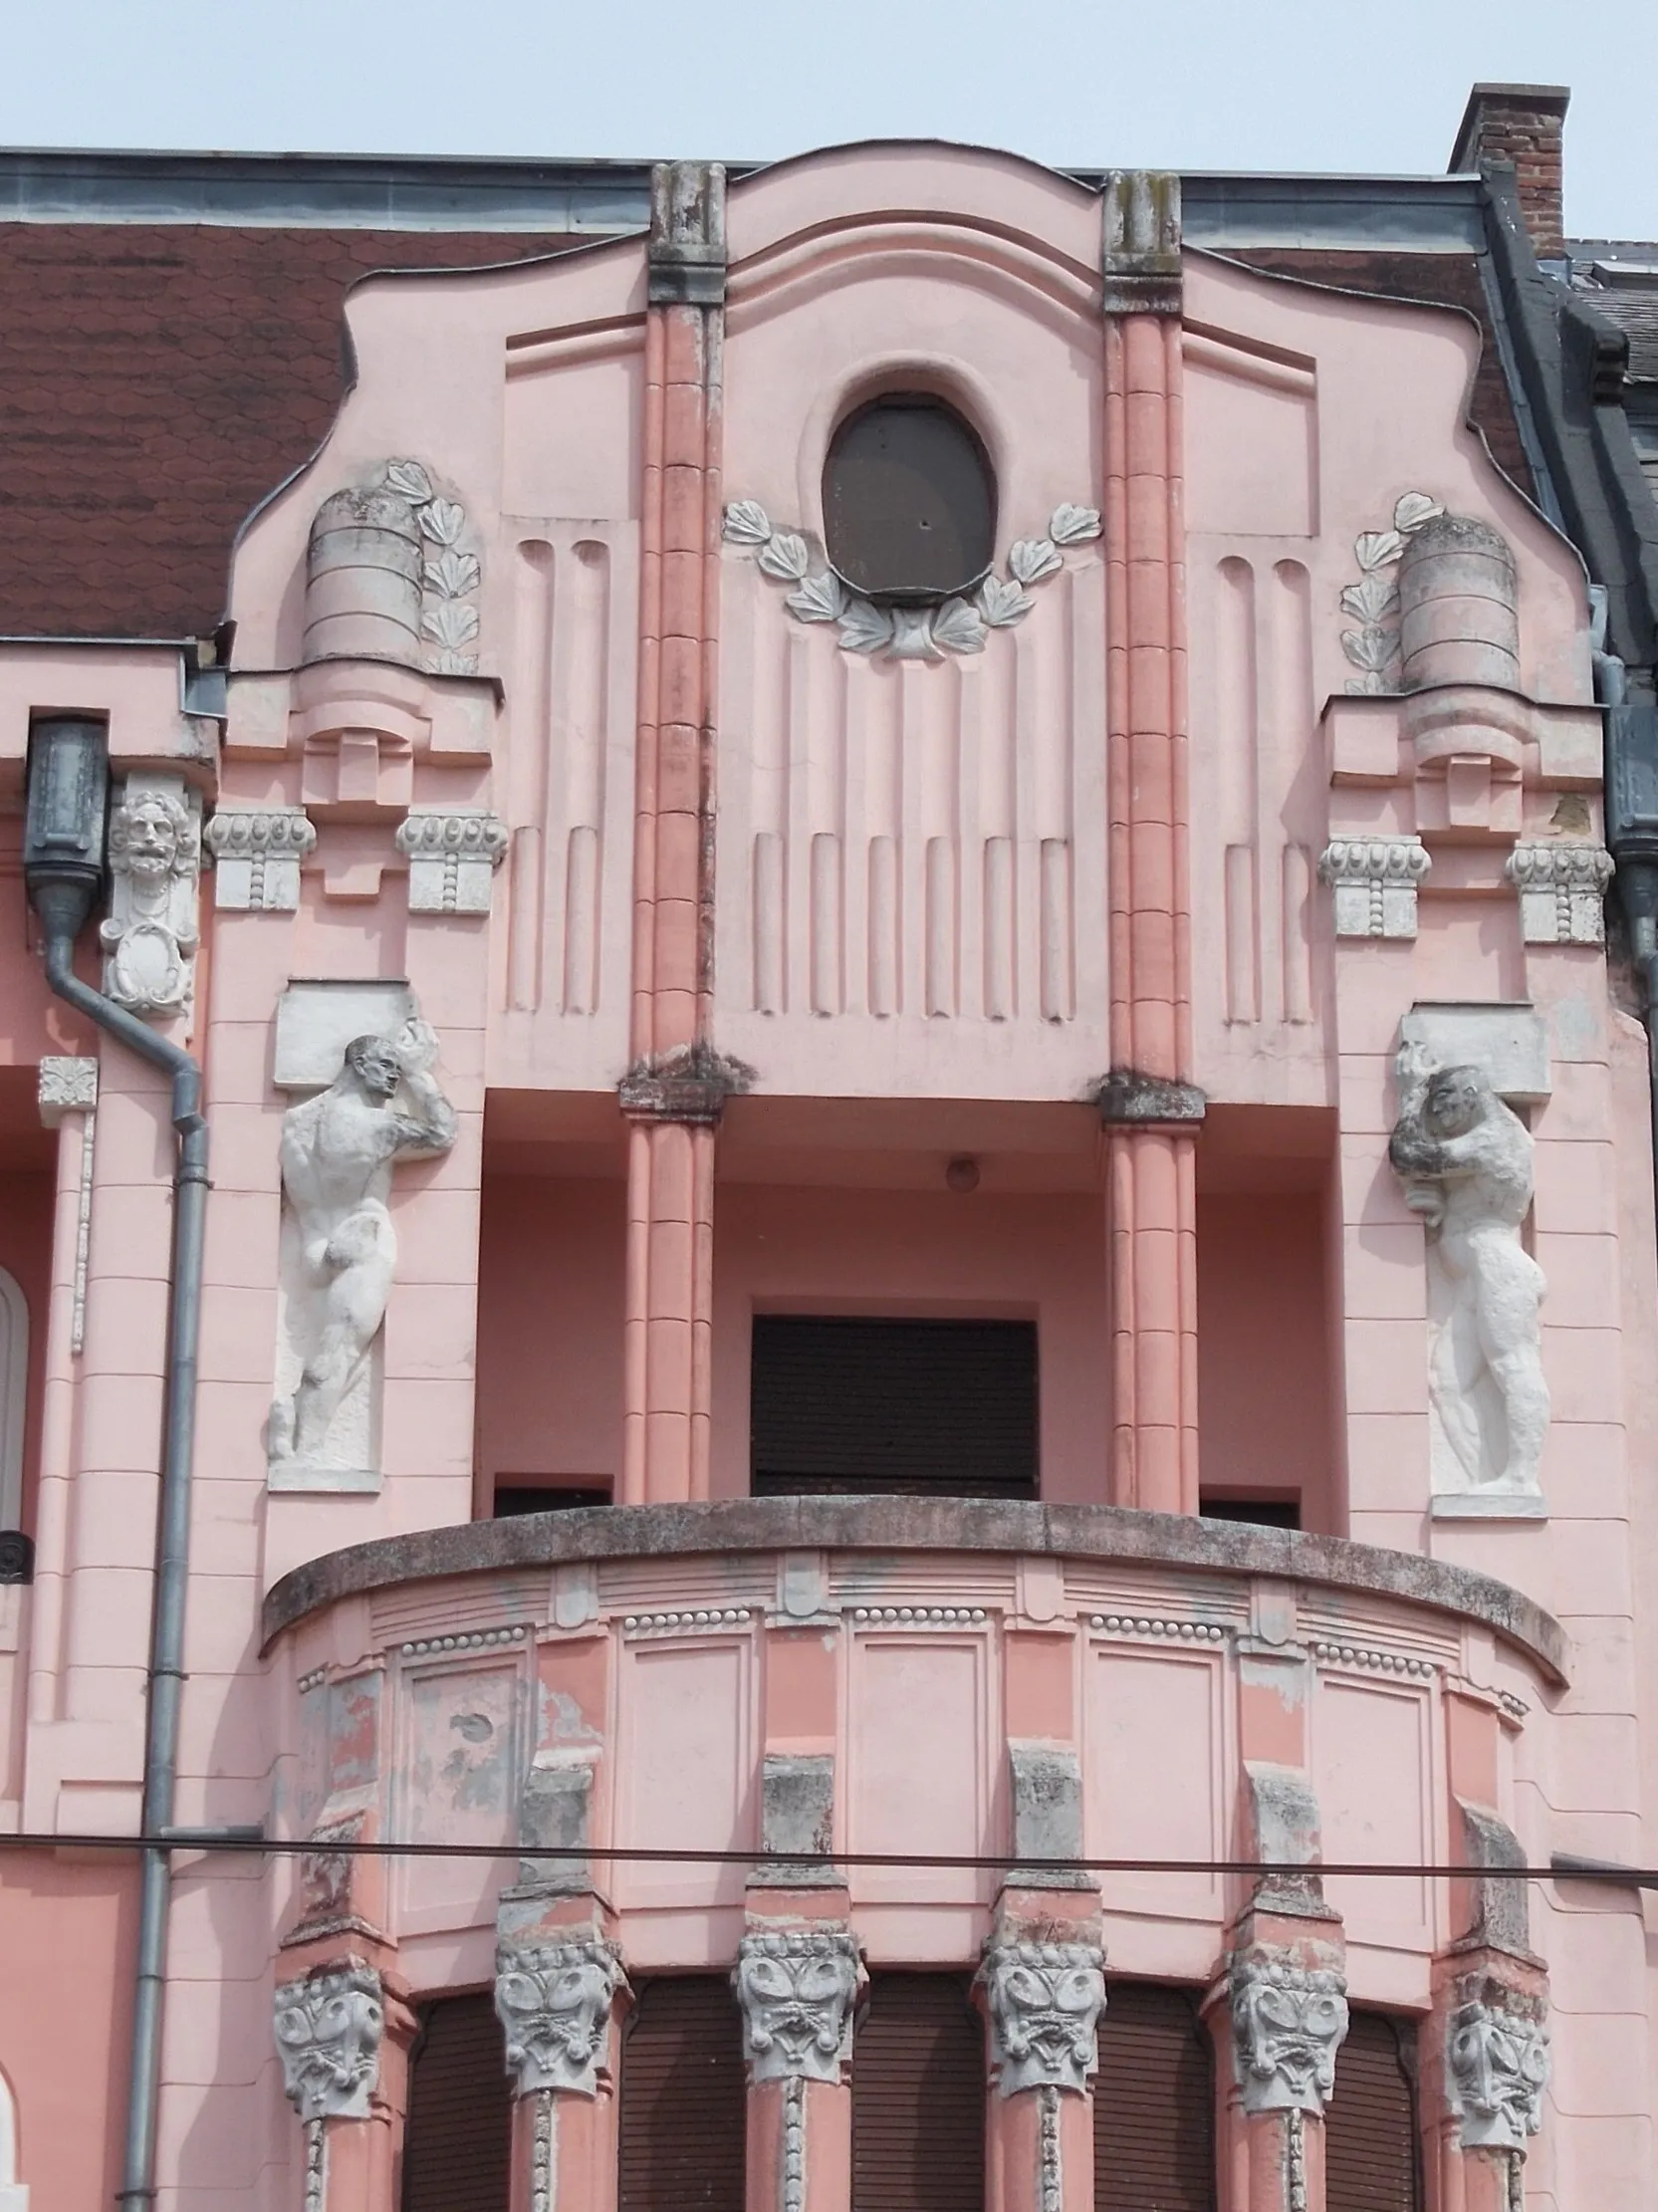 Photo showing: HQ of the former Debrecen First Savings Bank. Buil in 1912 Planned by Kálmán Rimanóczy Jr.. Construction contractors: István Tóth, Szilágyi and Pavlovits. Facade allegorical sculptures related to agriculture, industry and commerce  and the nude male stuccos are Sándor Somogyi works). There is couple bronze bird statues (Turul?). Inside coulmn capatáls made from Zsolnay ceramic. In addition to the premises of the Savings Bank, there were shops on the ground floor, on the Kossuth street side there were originally an officer's casino, in the cellar there was a beer hall and restaurant, on the floors there were seventeen luxury rental apartments. - 22-24 Piac Street, Inner City,Debrecen, Hajdú-Bihar County, Hungary.